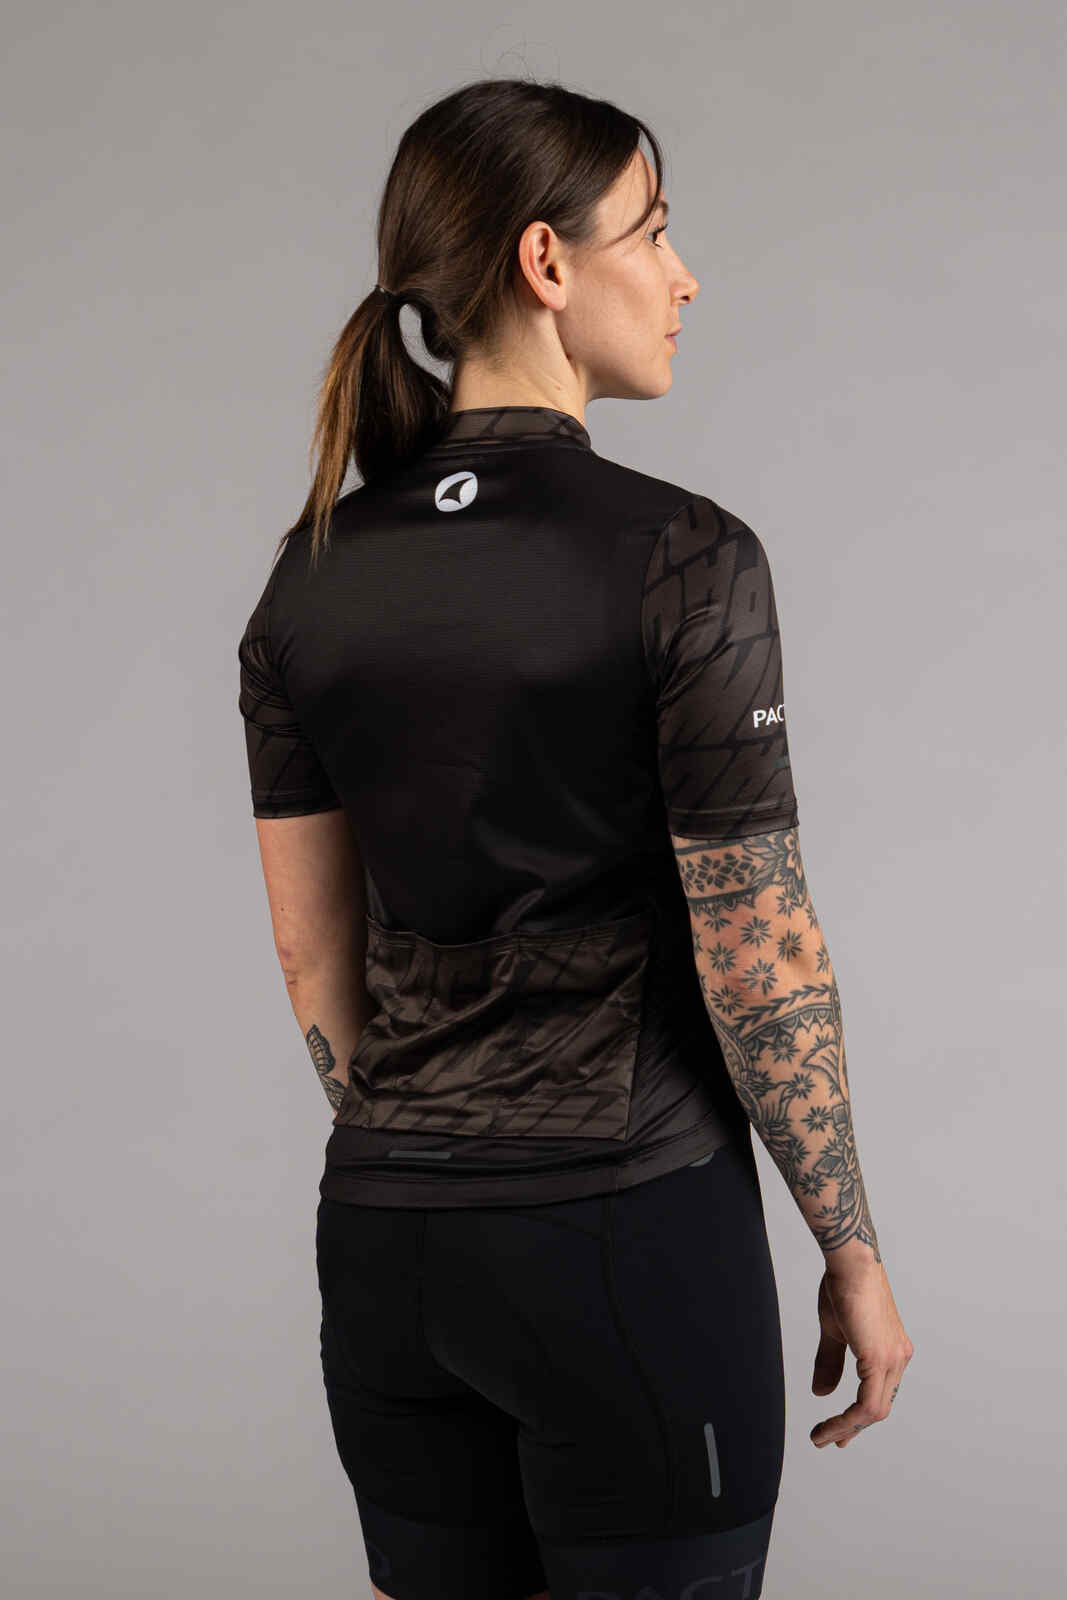 Women's Black Ascent Cycling Jersey - Back View